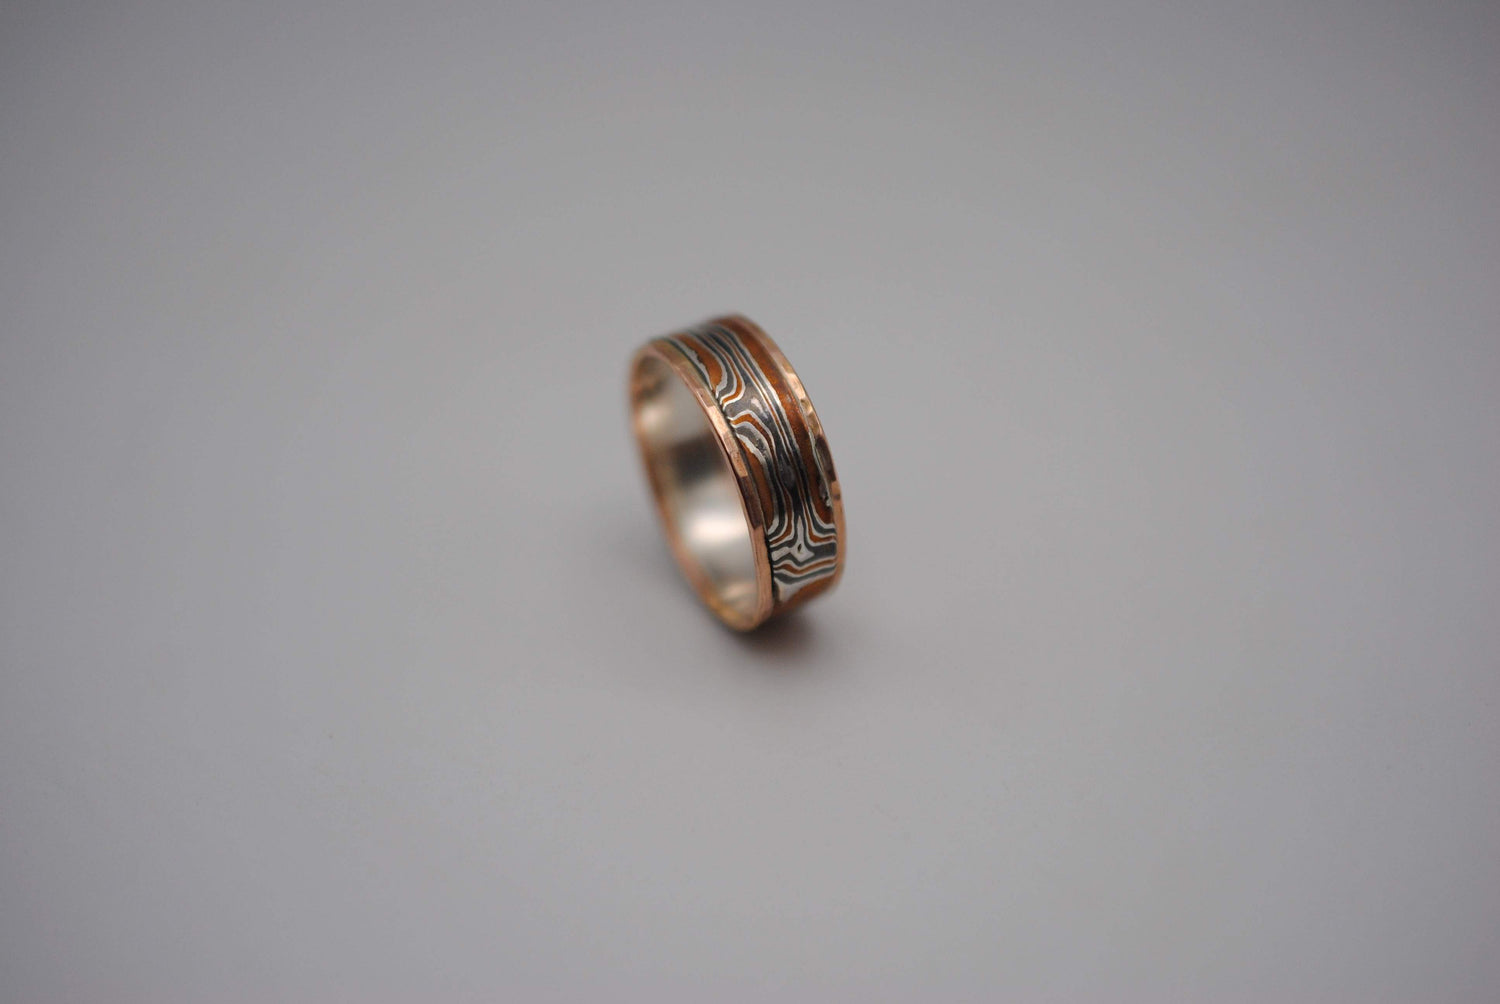 A mokume gane ring band. Mokume gane means metals that look like woodgrain. It's banded in Rose Gold. This frames in the woodgrain.